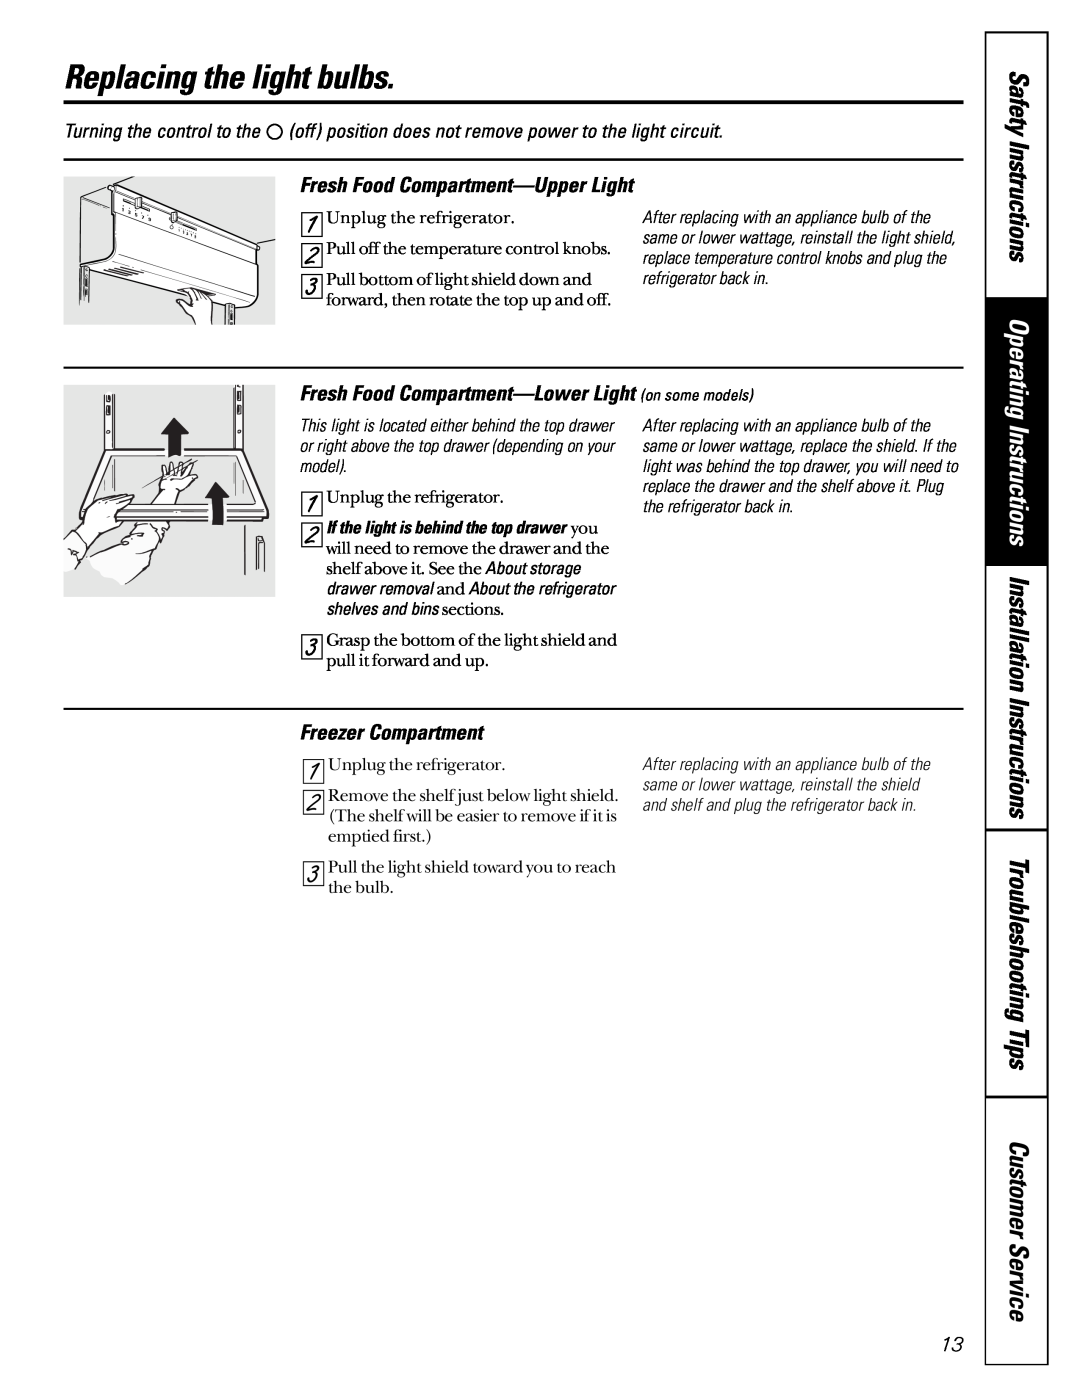 GE 162D7744P009 owner manual Replacing the light bulbs, 1 2 3, Instructions Installation, Safety Instructions Operating 